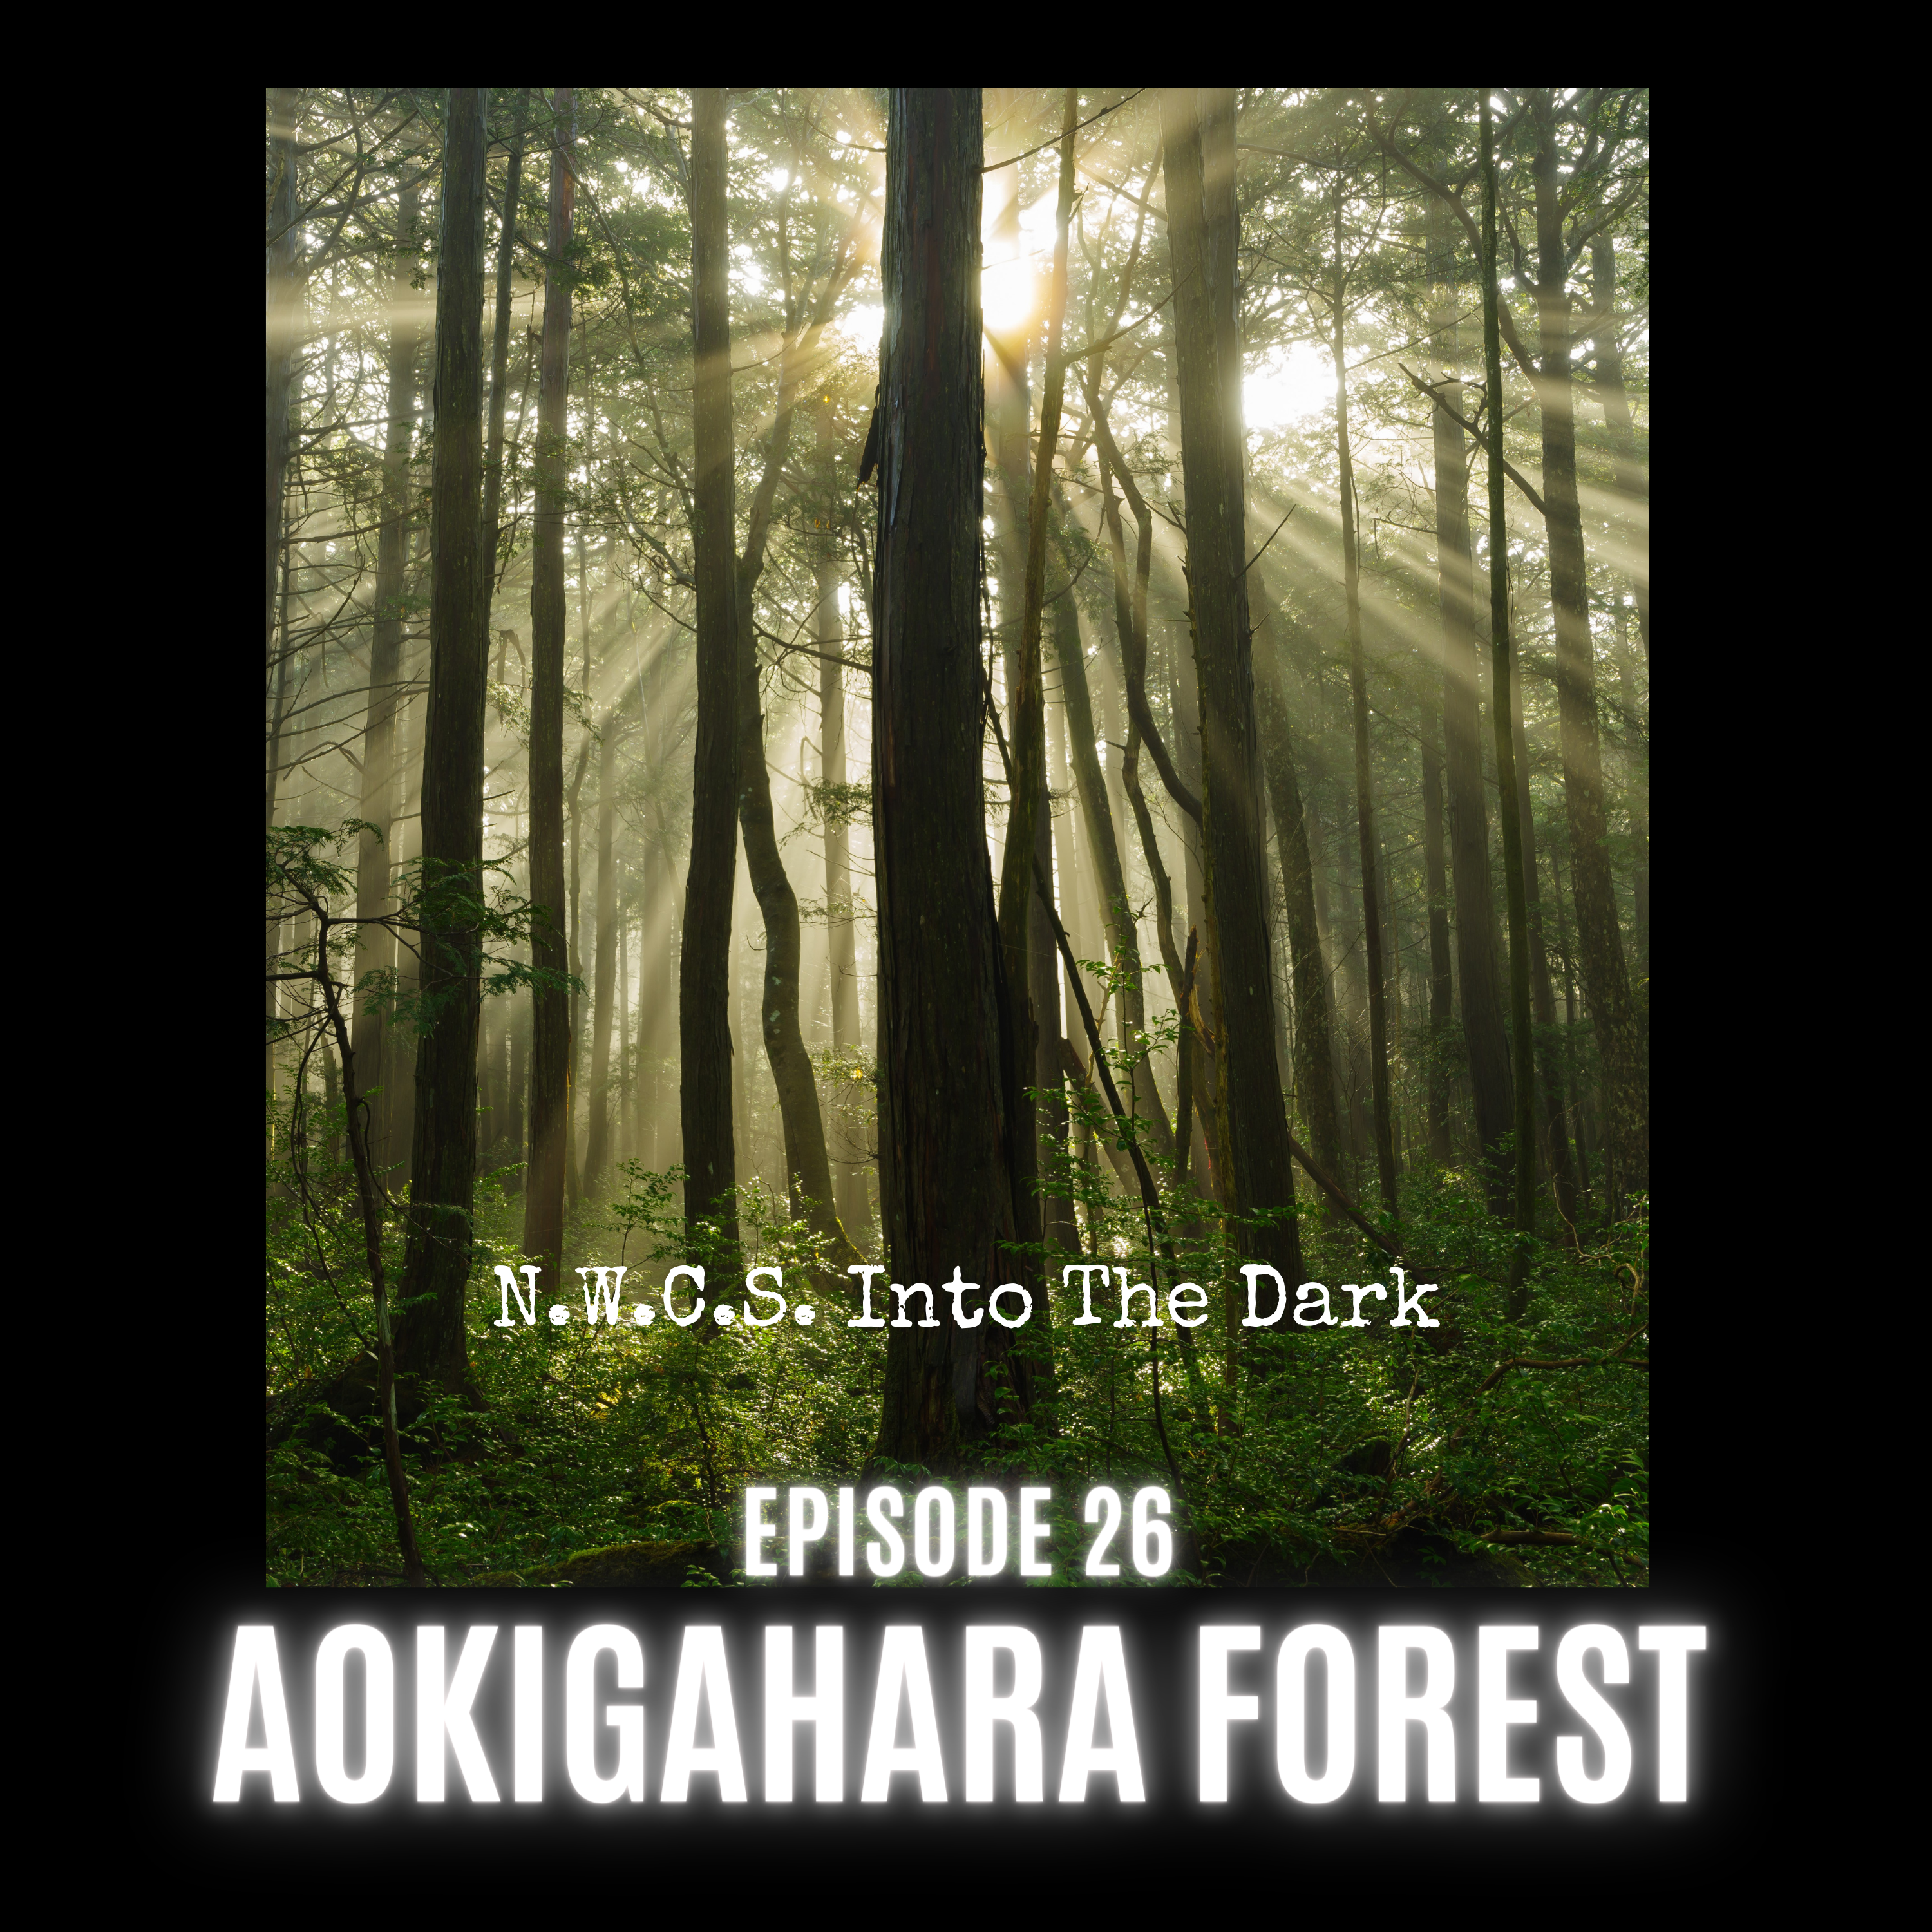 NWCS - Into The Dark Episode 26 Aokigahara Forest